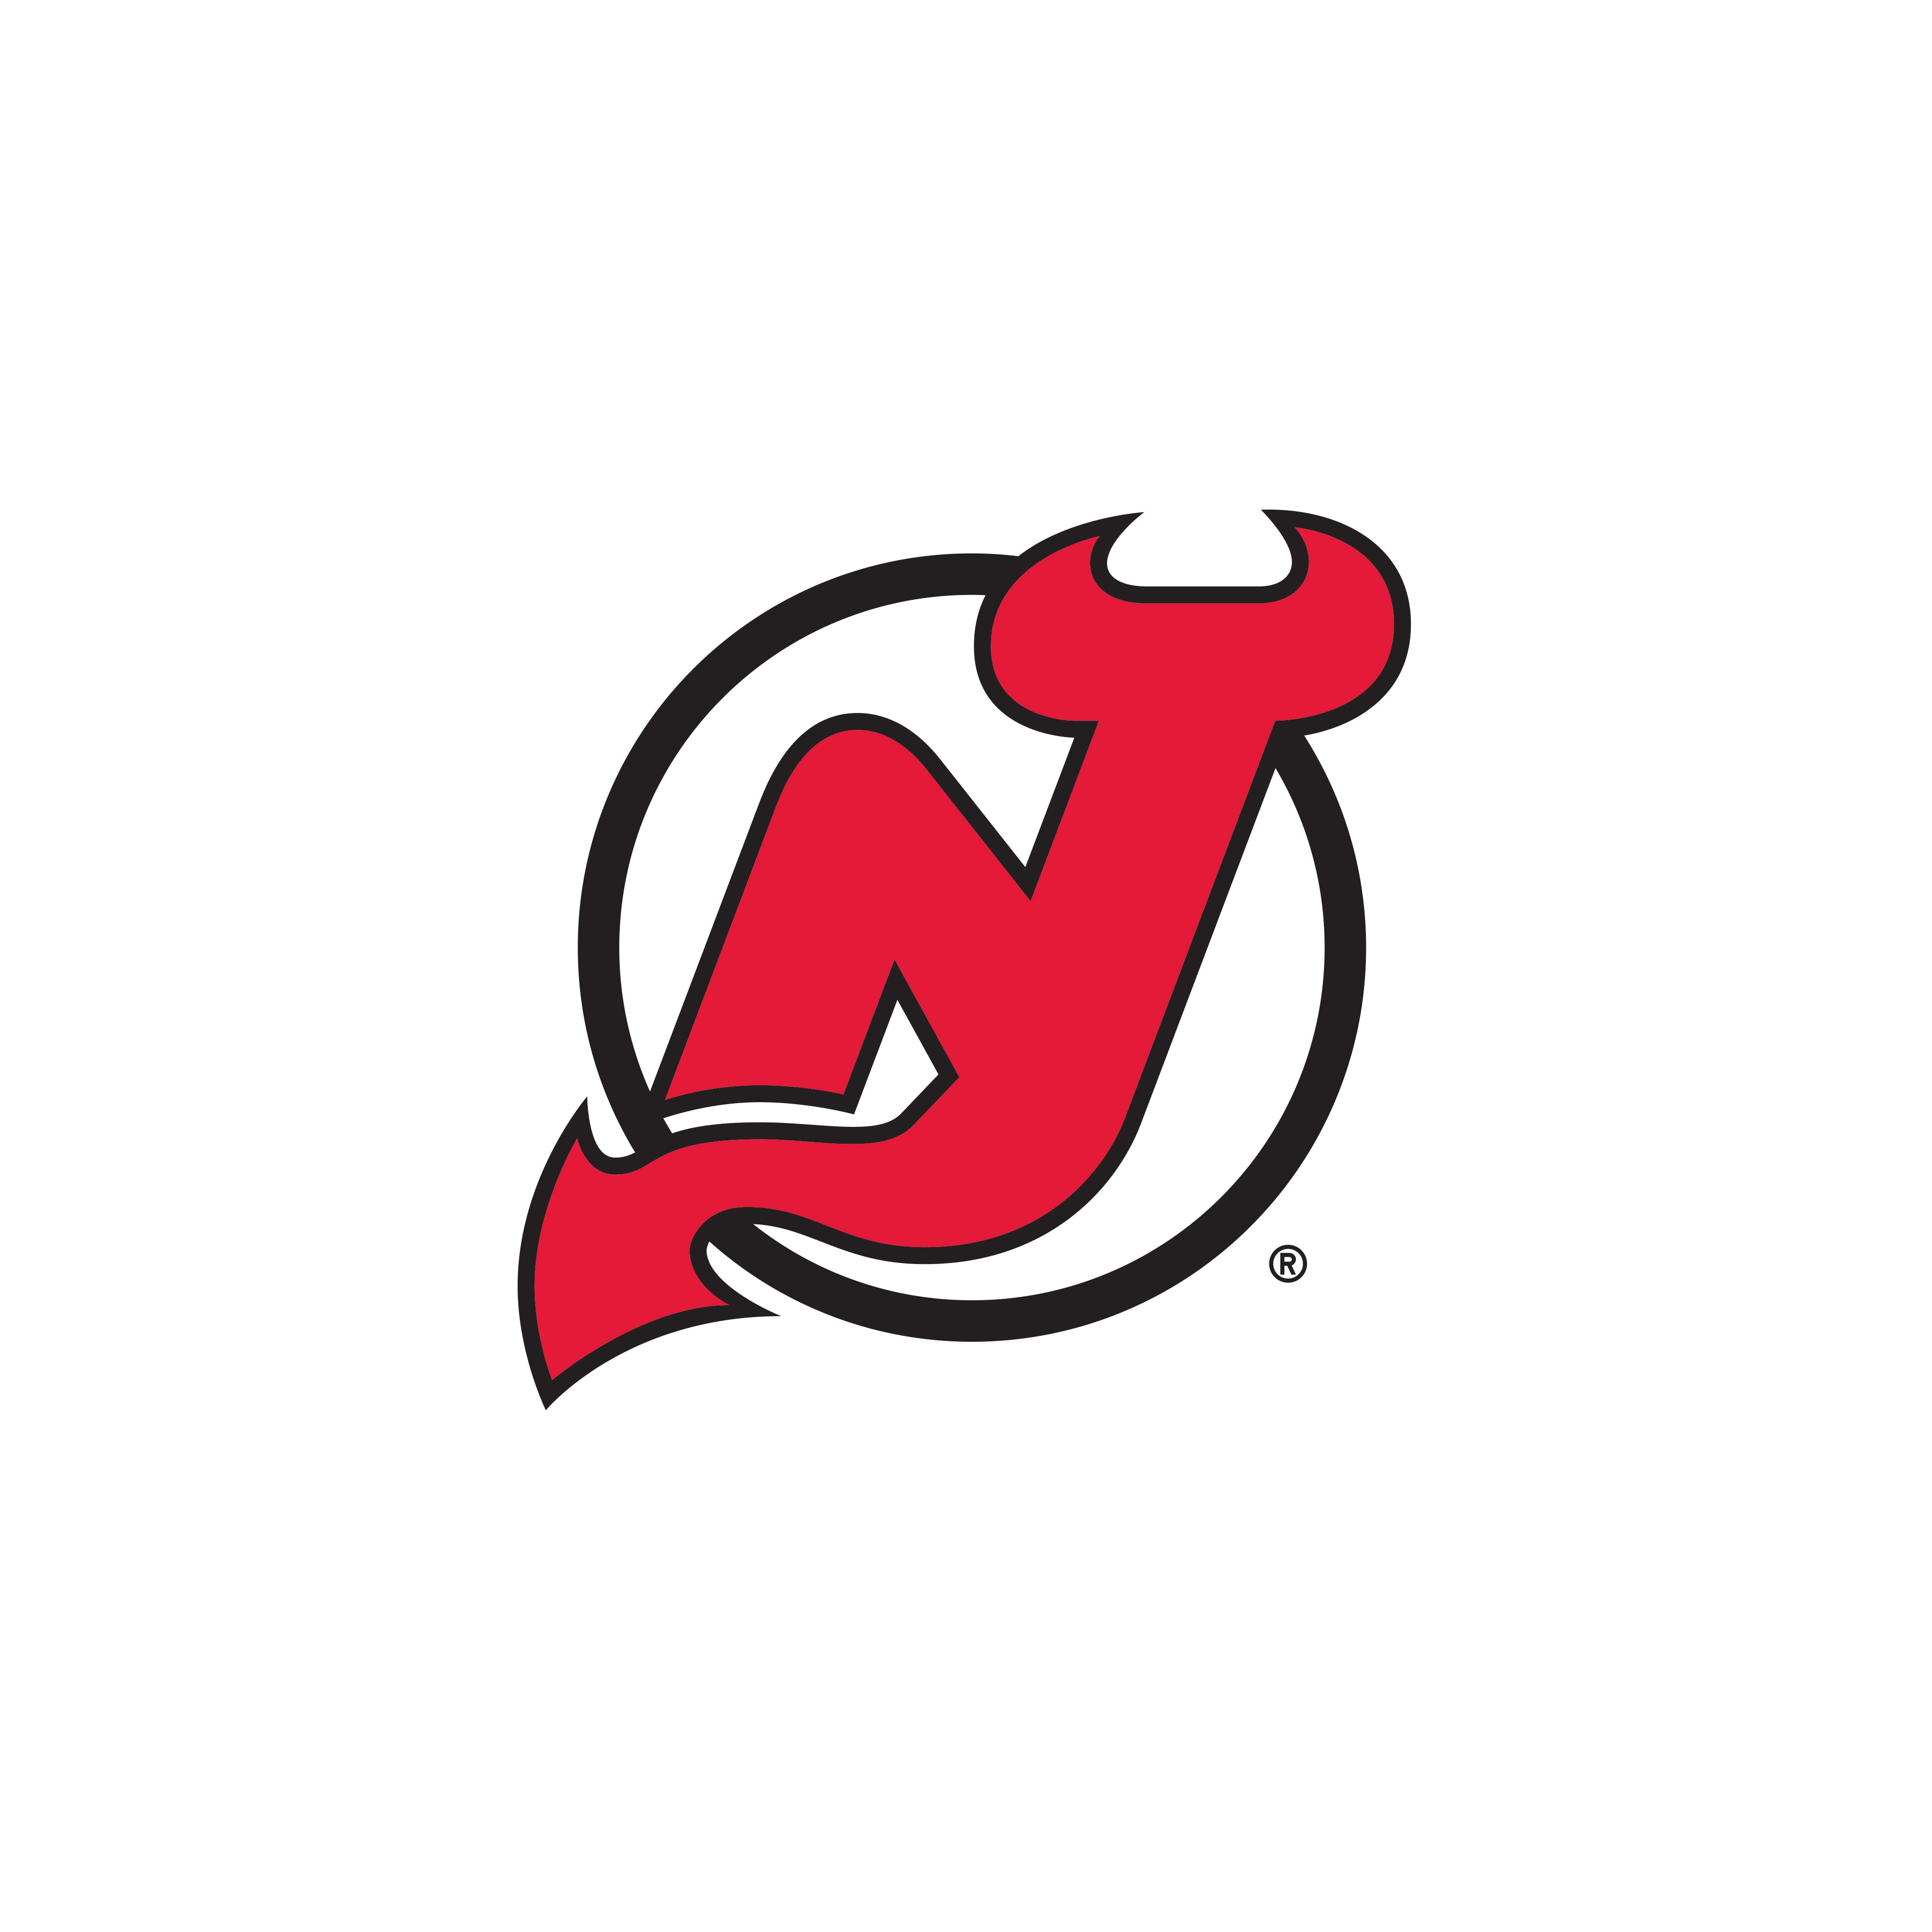 New Jersey Devils (@njdevils) • Instagram photos and videos